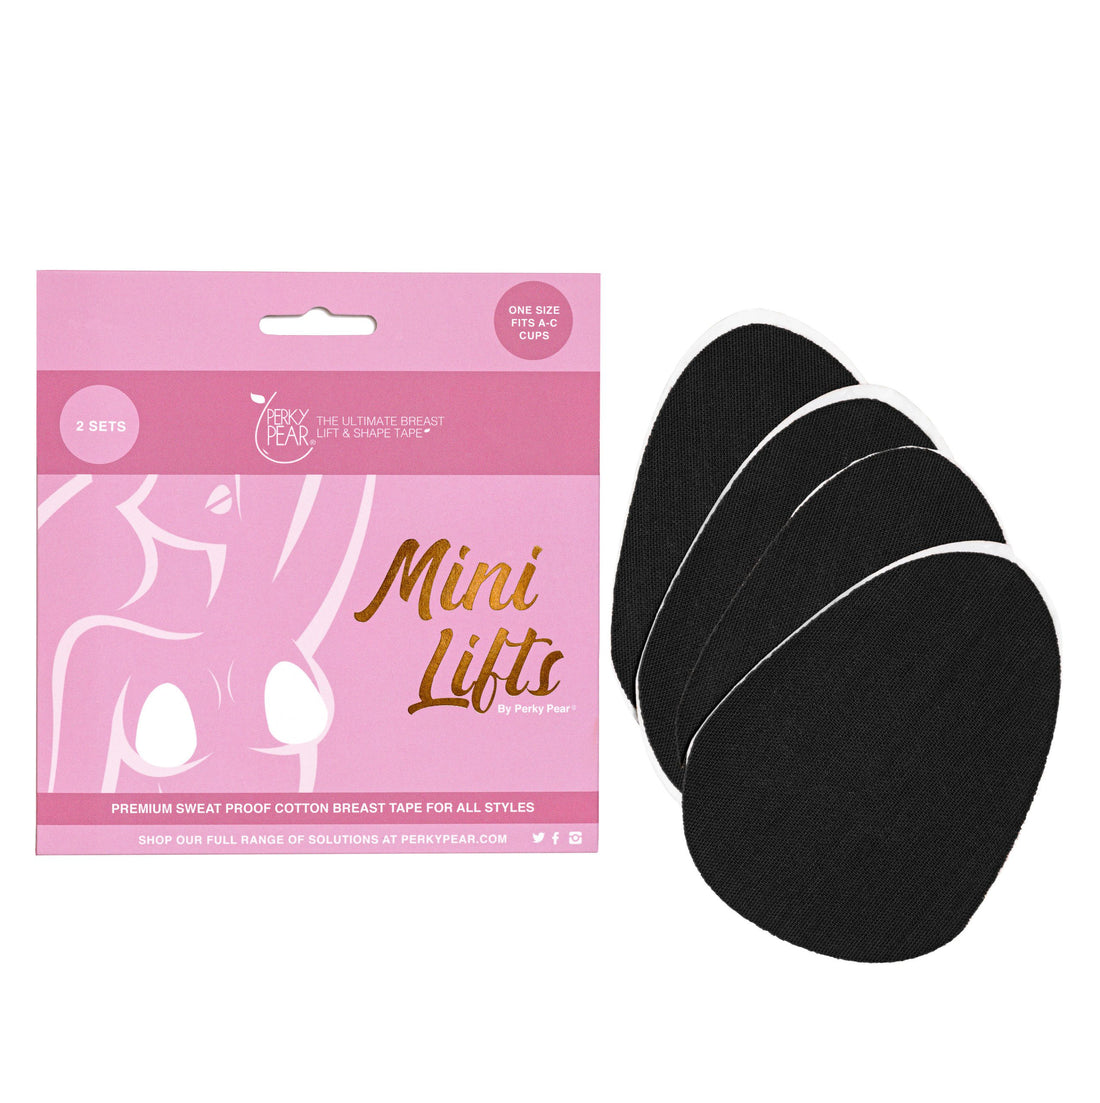 How does Perky Pear breast tape work?